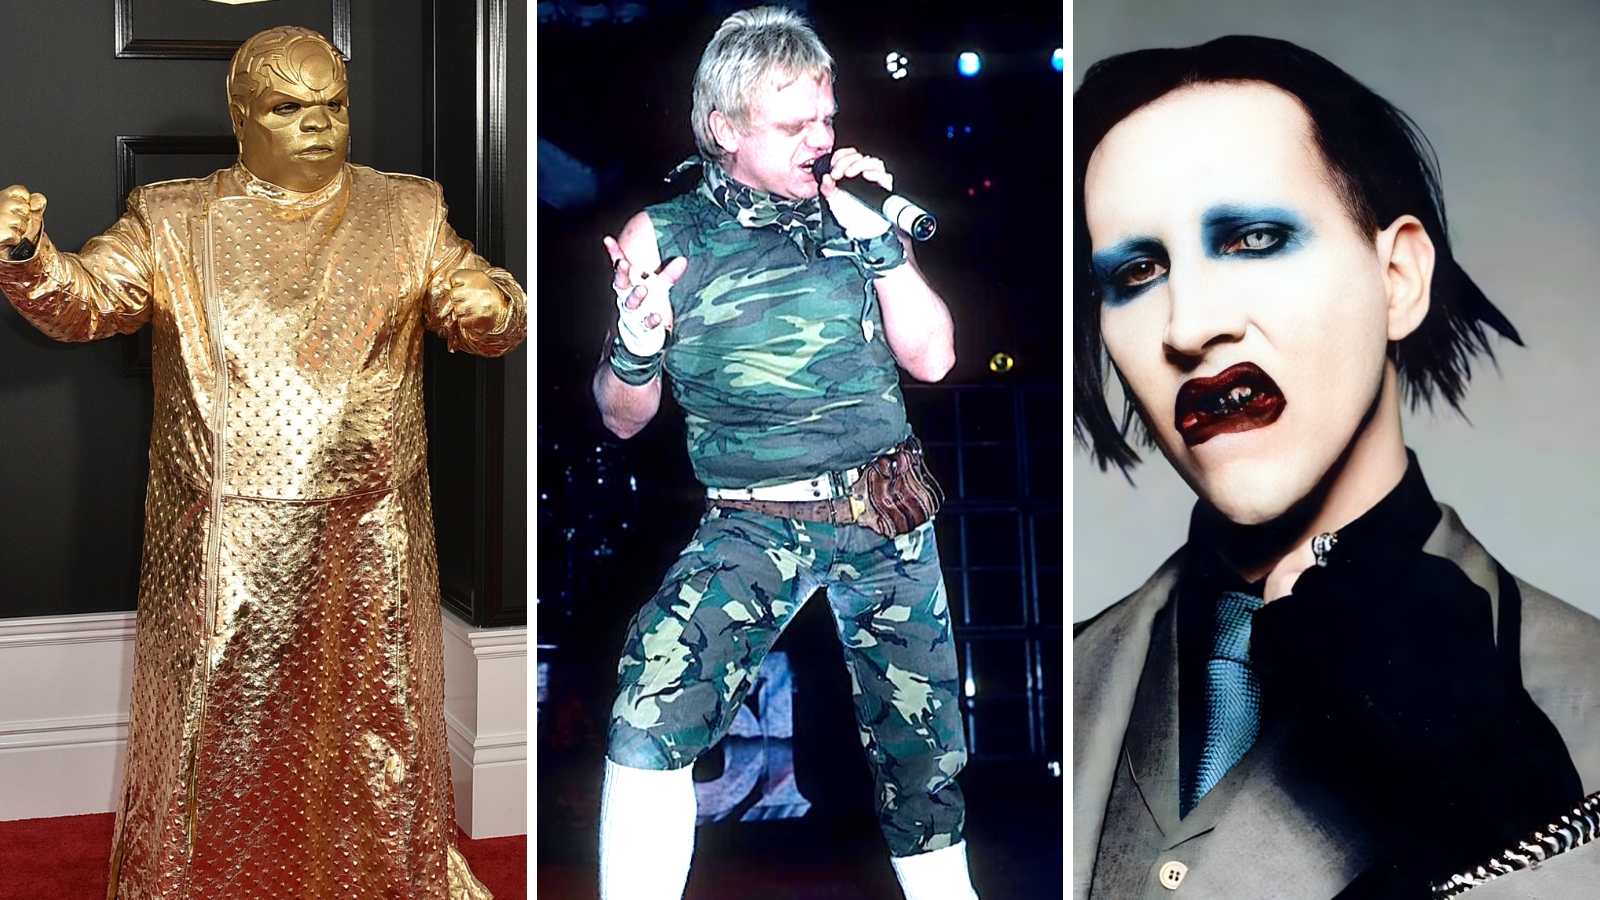 Weirdest Outfits We've Ever Seen in Music History